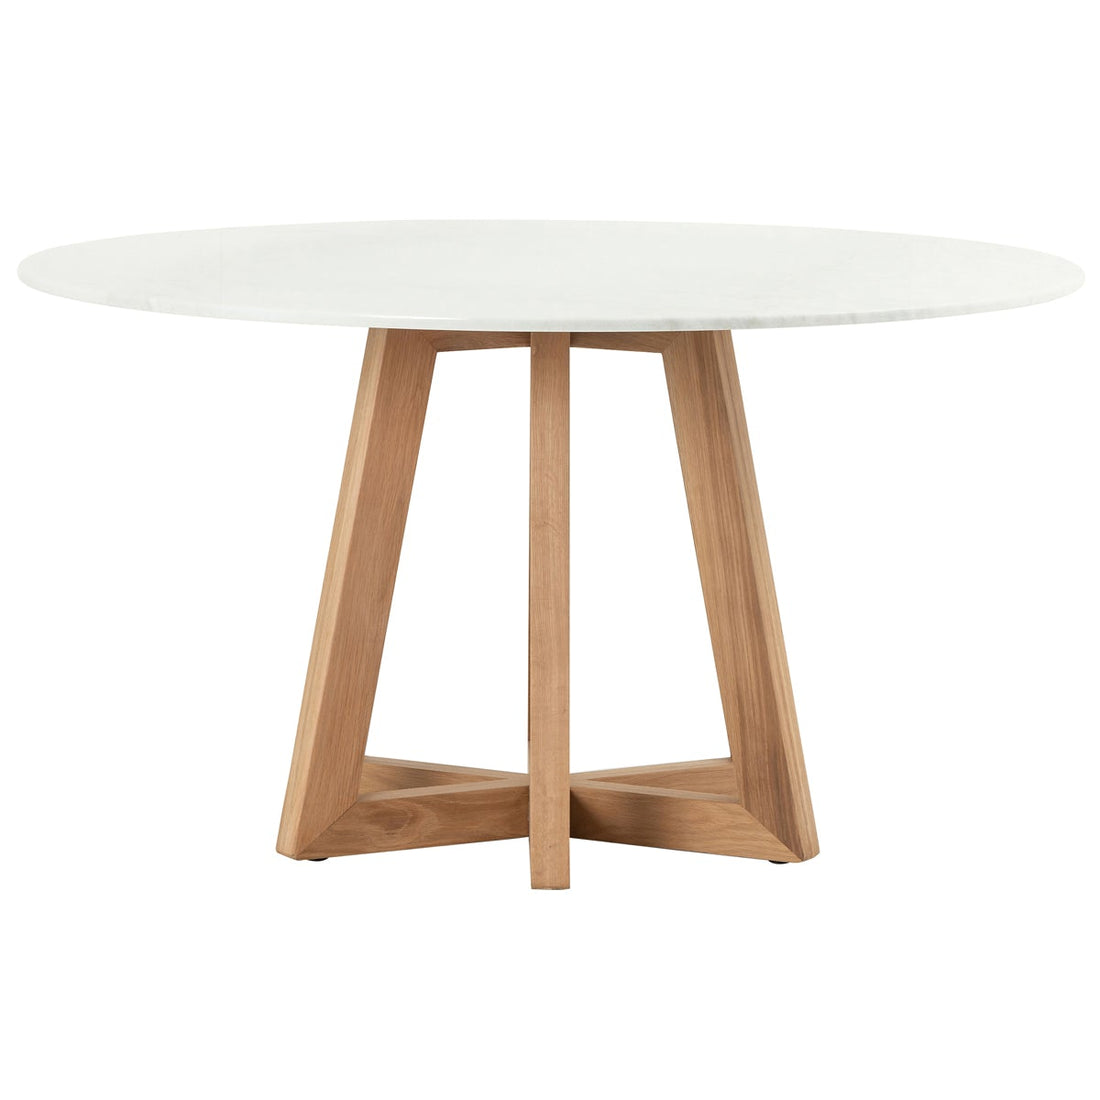 Four Hands Hughes Creston Dining Table - White Marble